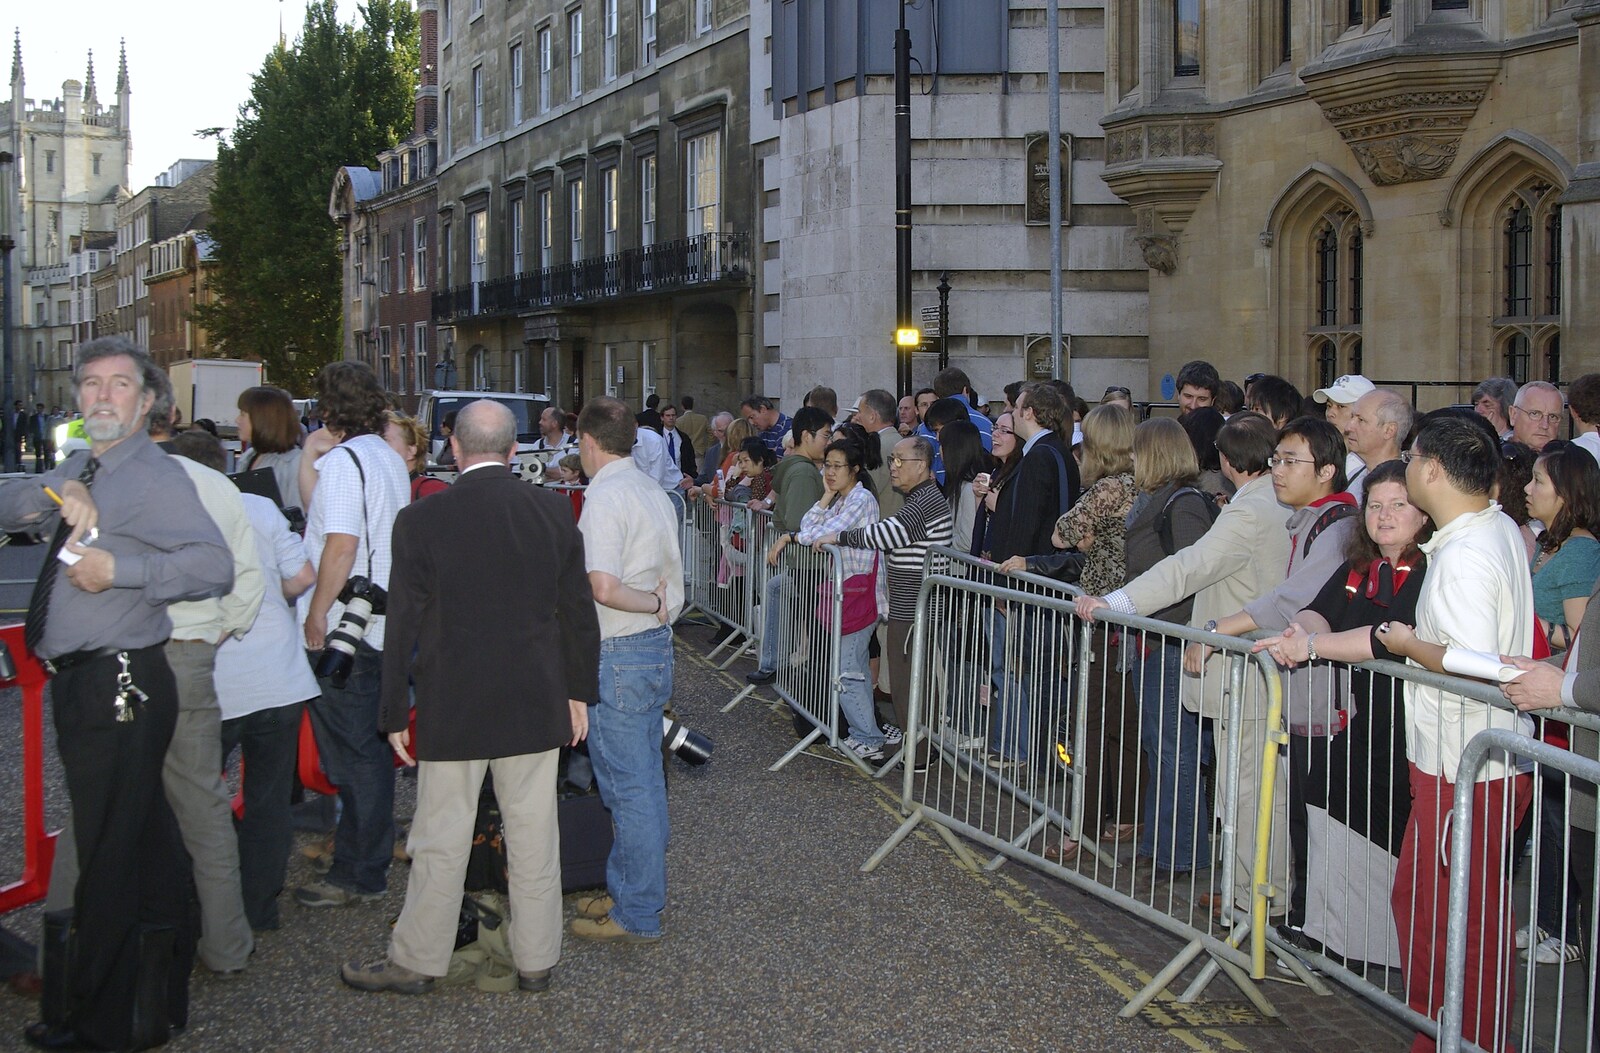 A Brief Time in History: Stephen Hawking and the Corpus Christi Clock, Benet Street, Cambridge - 19th September 2008: The crowds on King's Parade/Trumpington Street